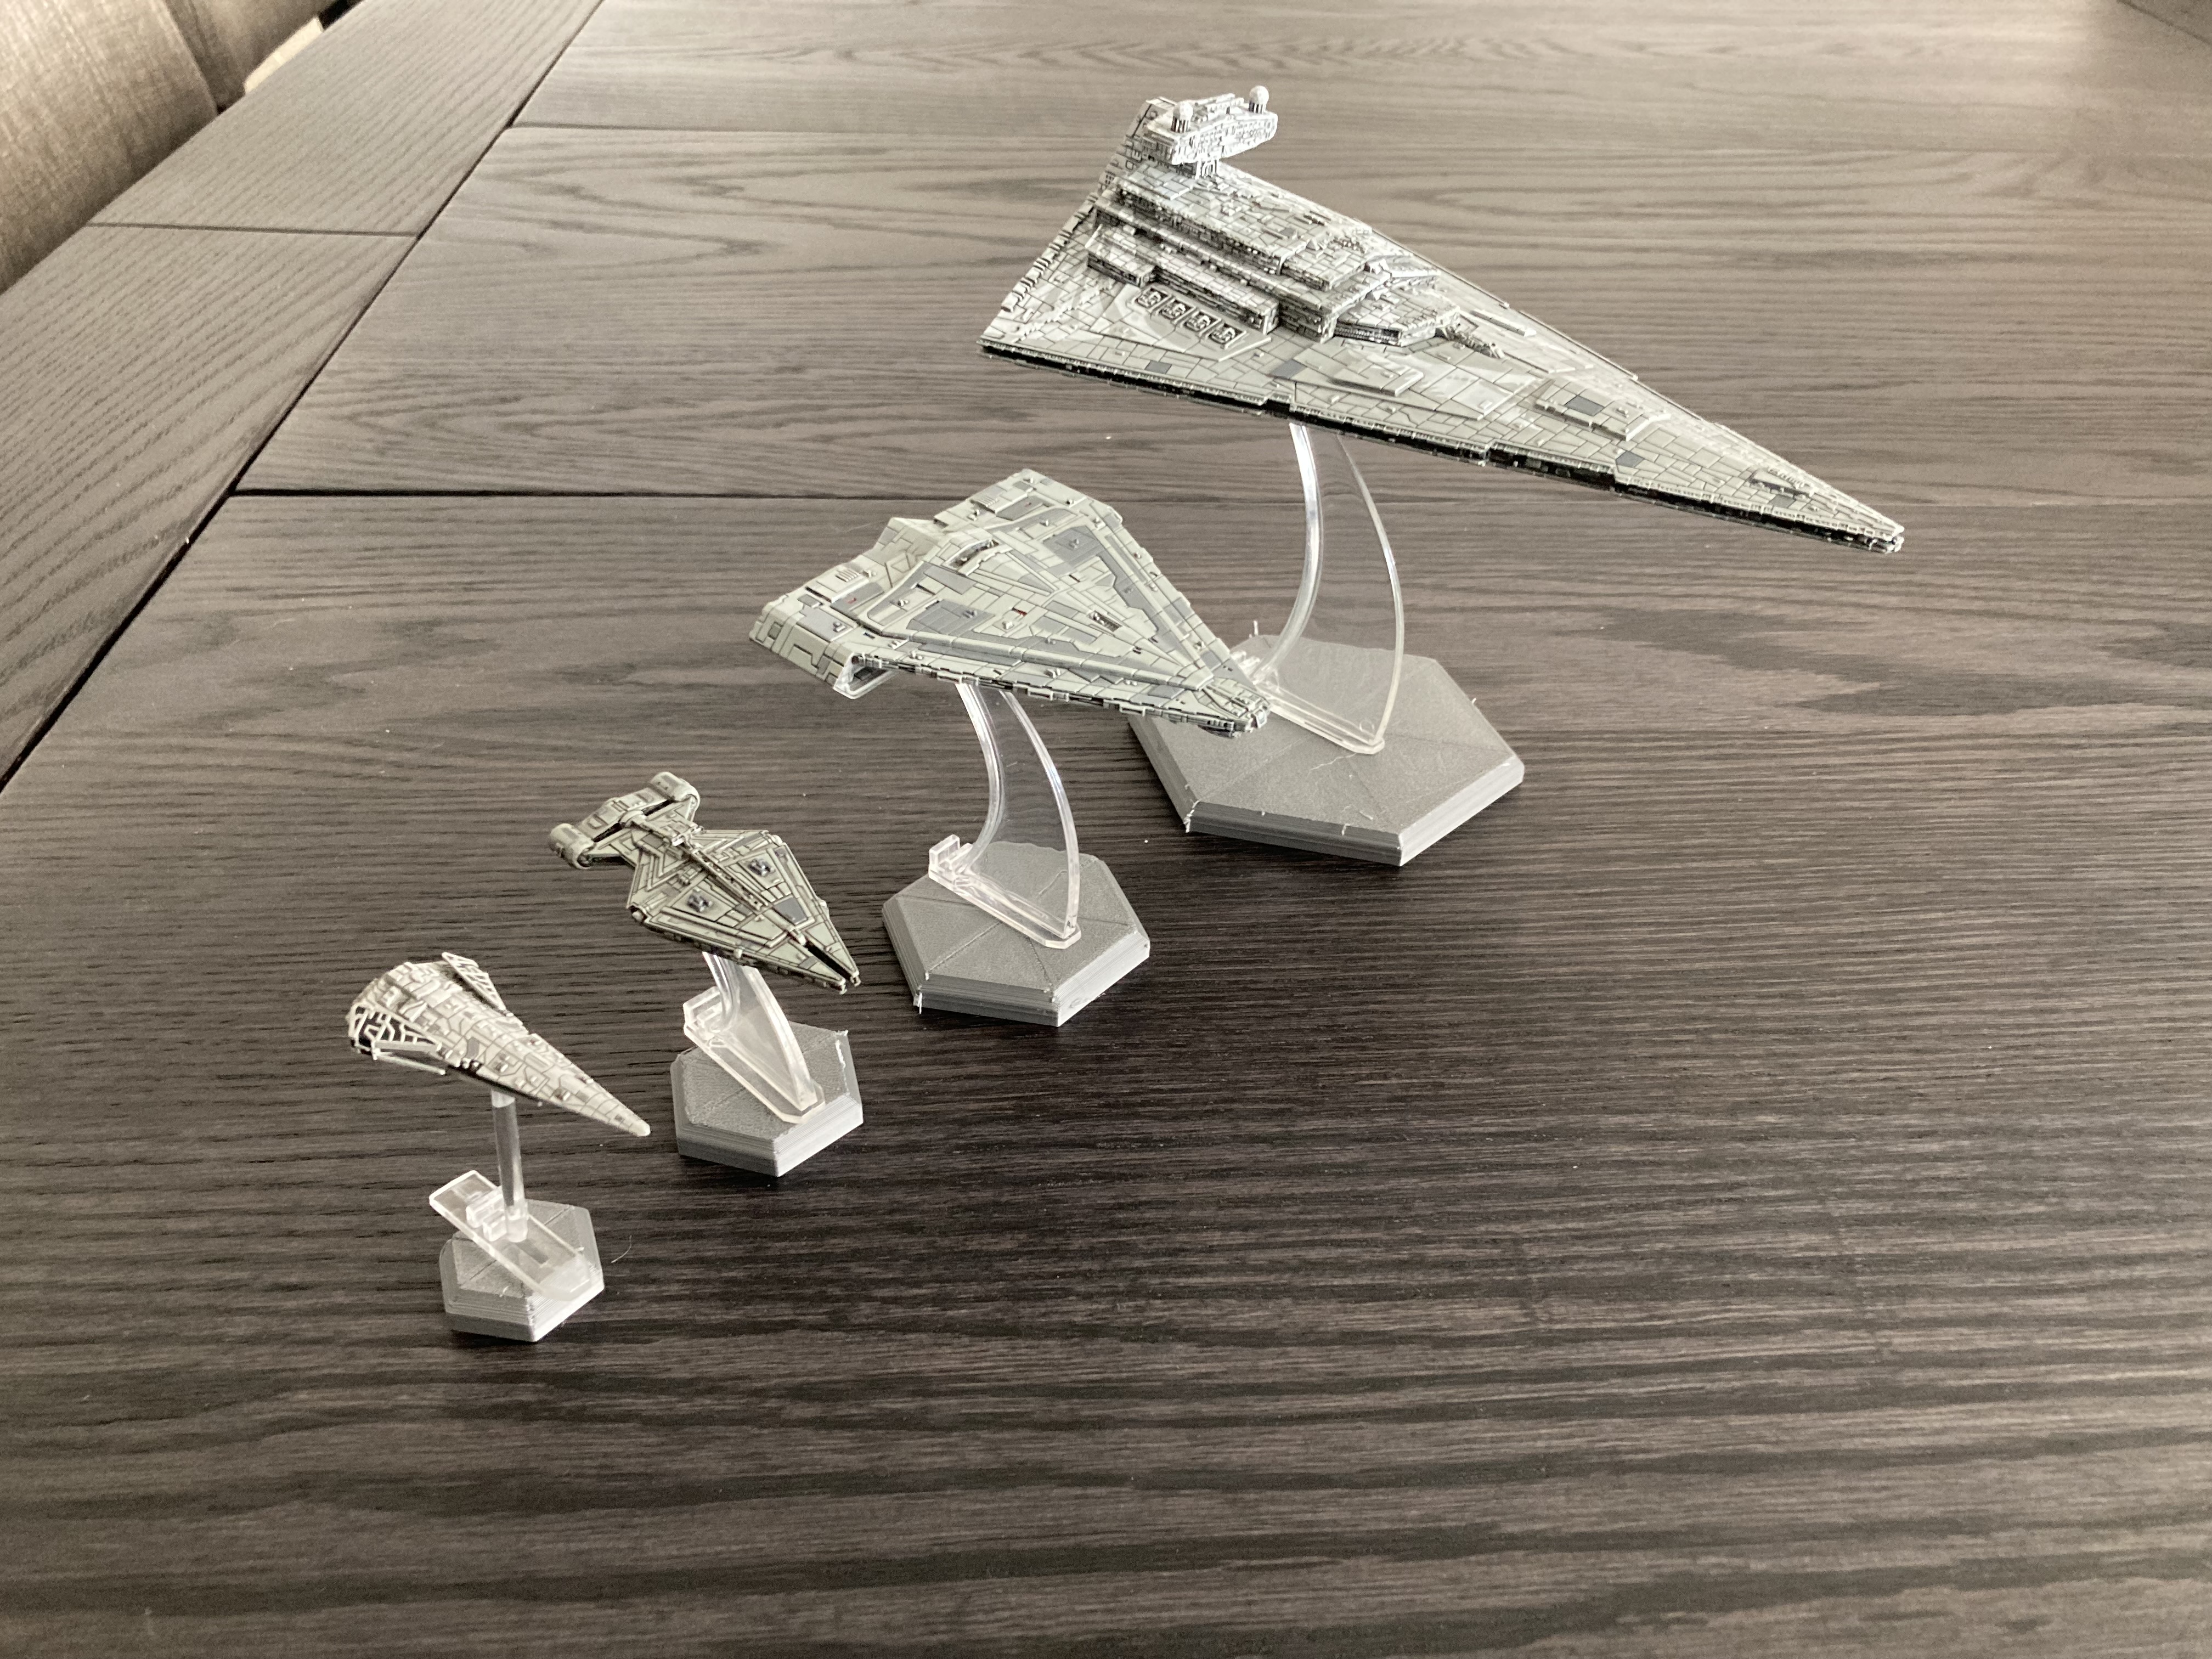 Hexbases for Star Wars Armada Flight Stands